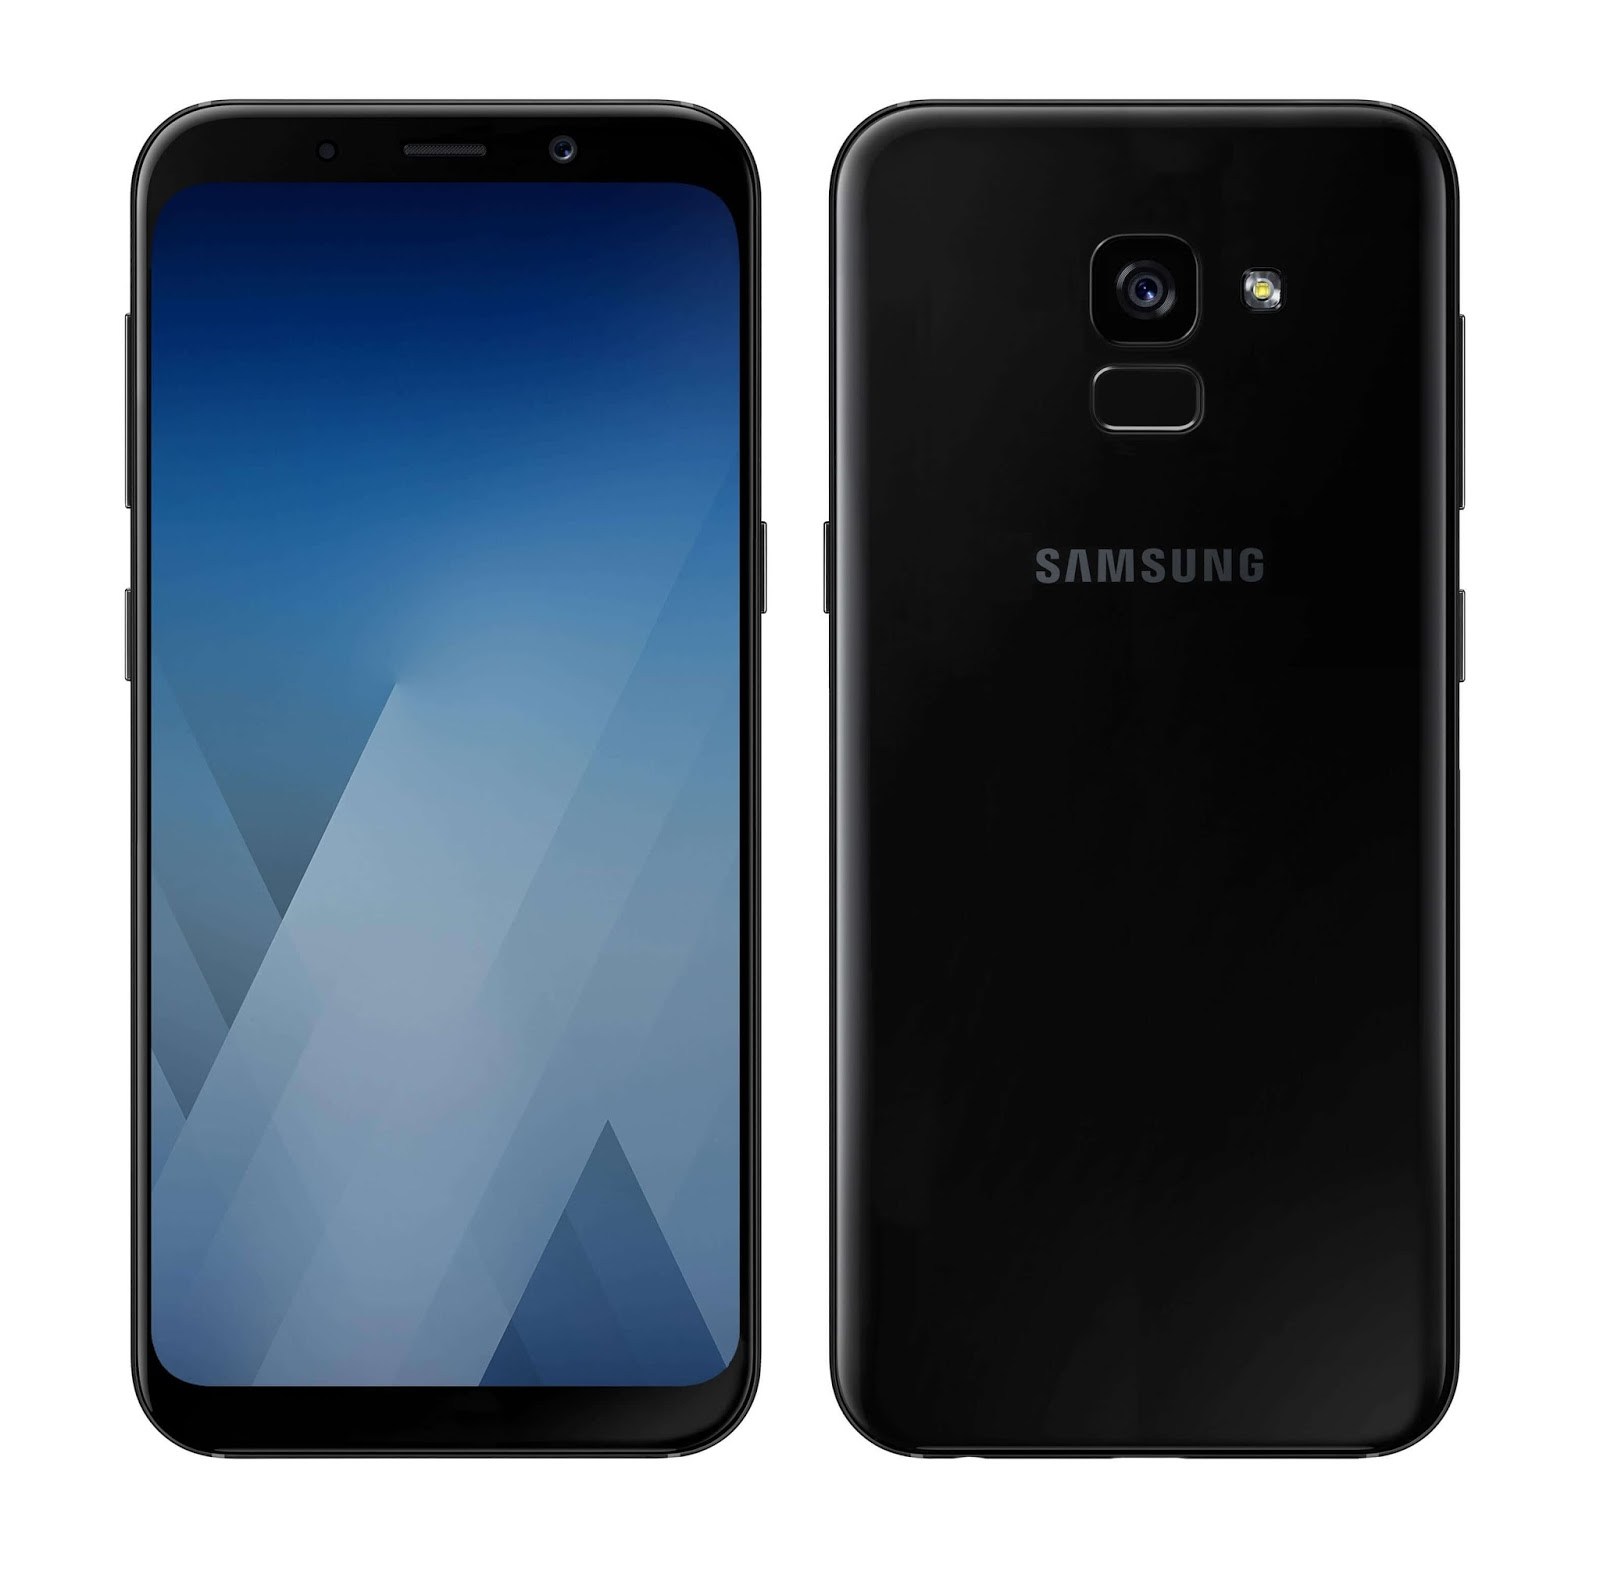 Galaxy A8 and Galaxy A8+ news, specs, features, price and release date